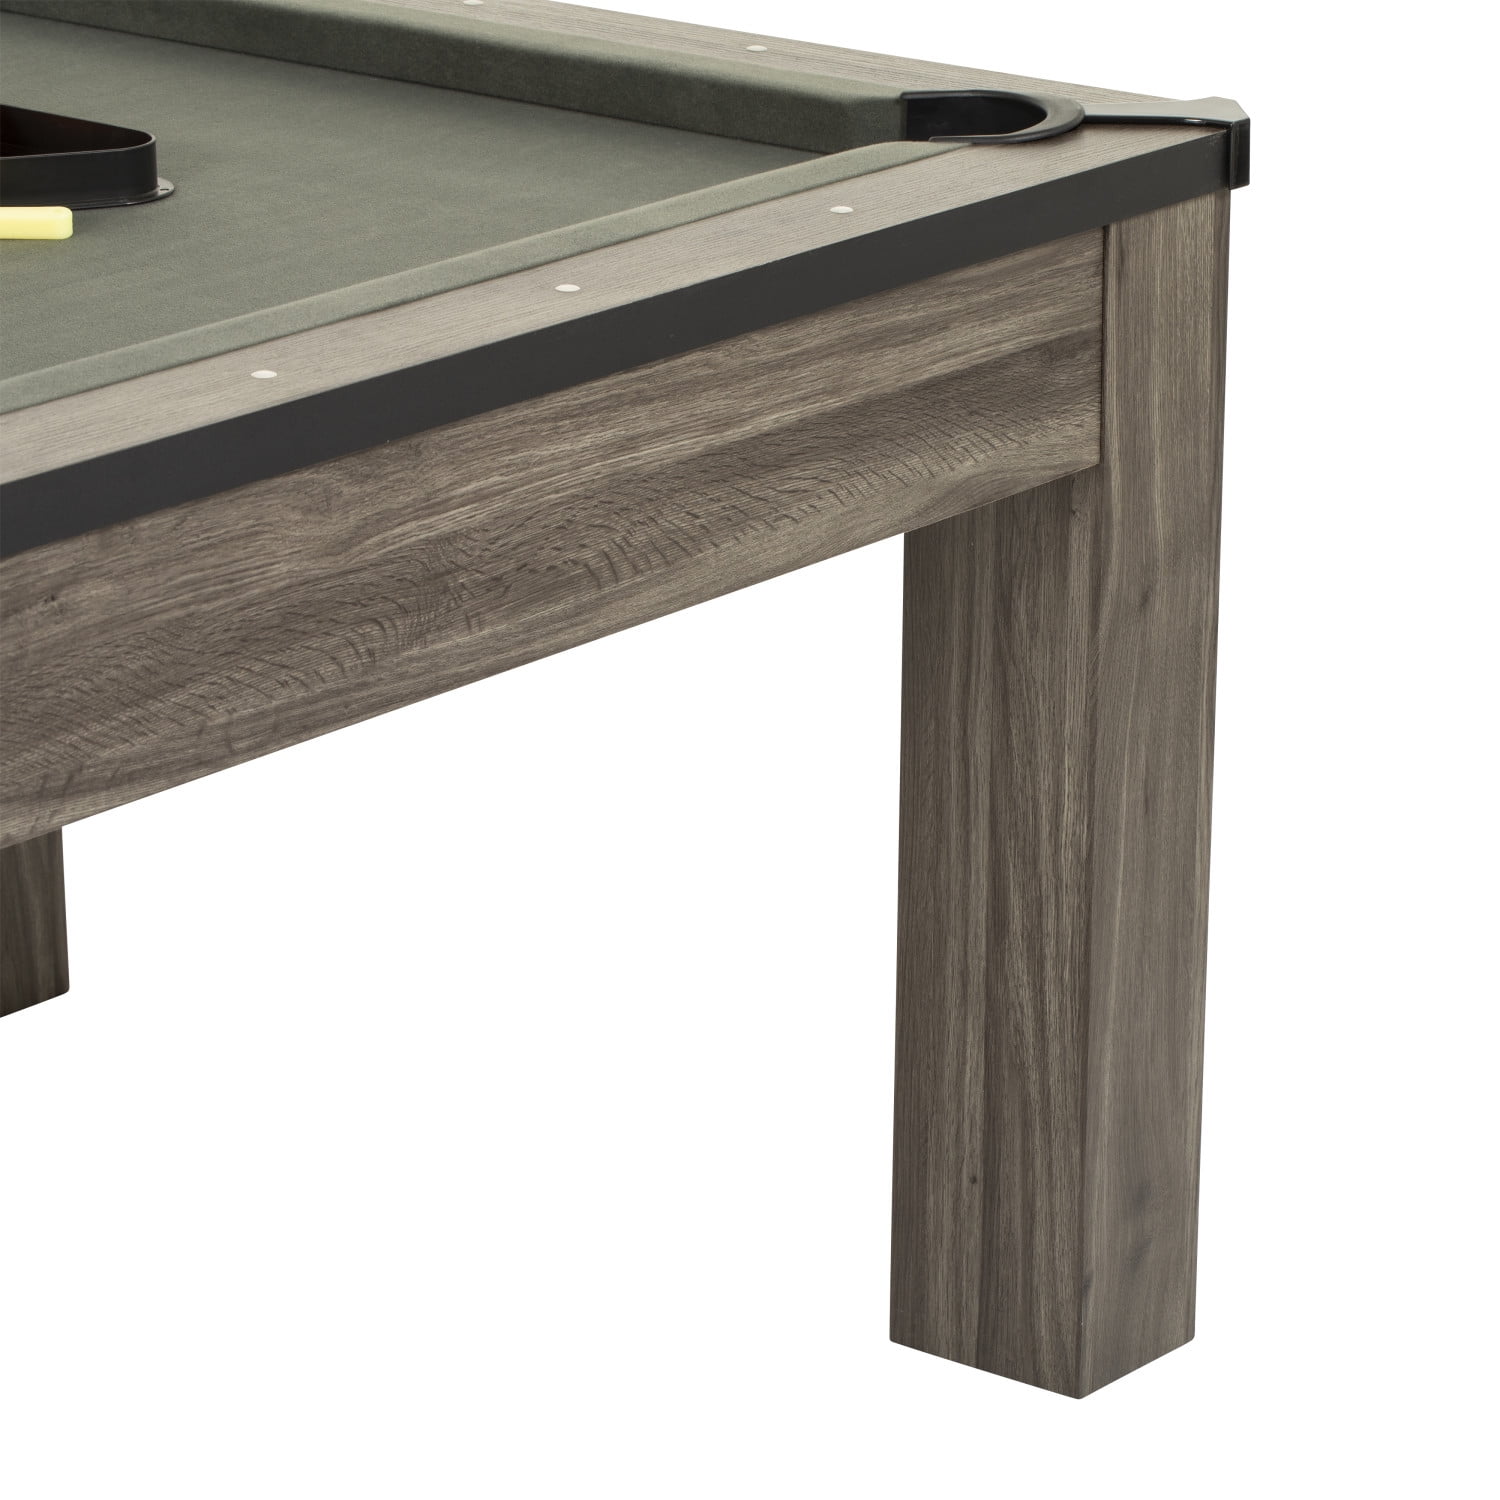 Hampton 3-In-1 Combo Game Table | Billiards + Ping Pong + Dining